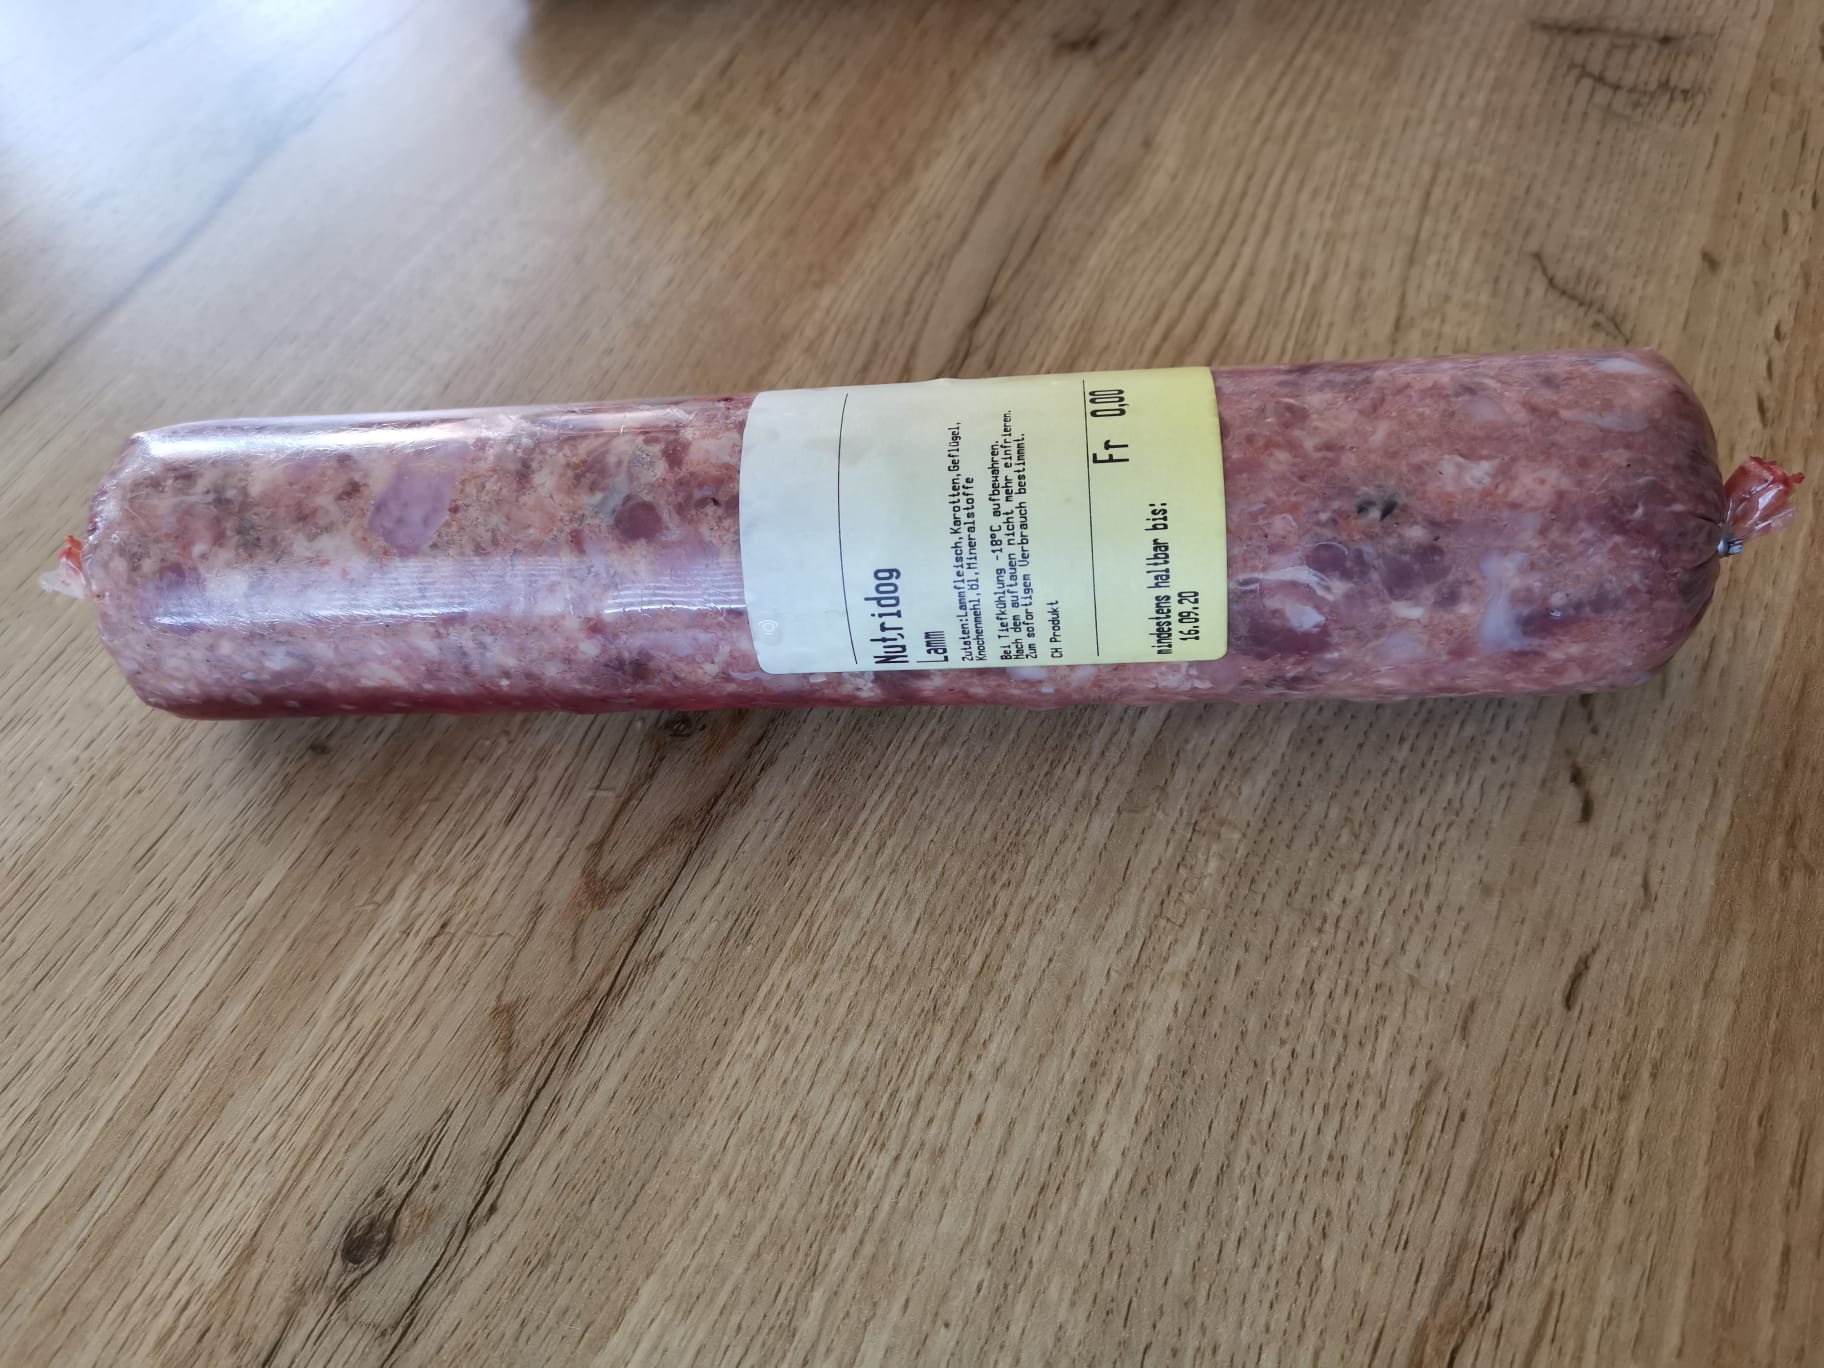 Lamb Mixed 200g per sausage only 4.90.- "Frozen".